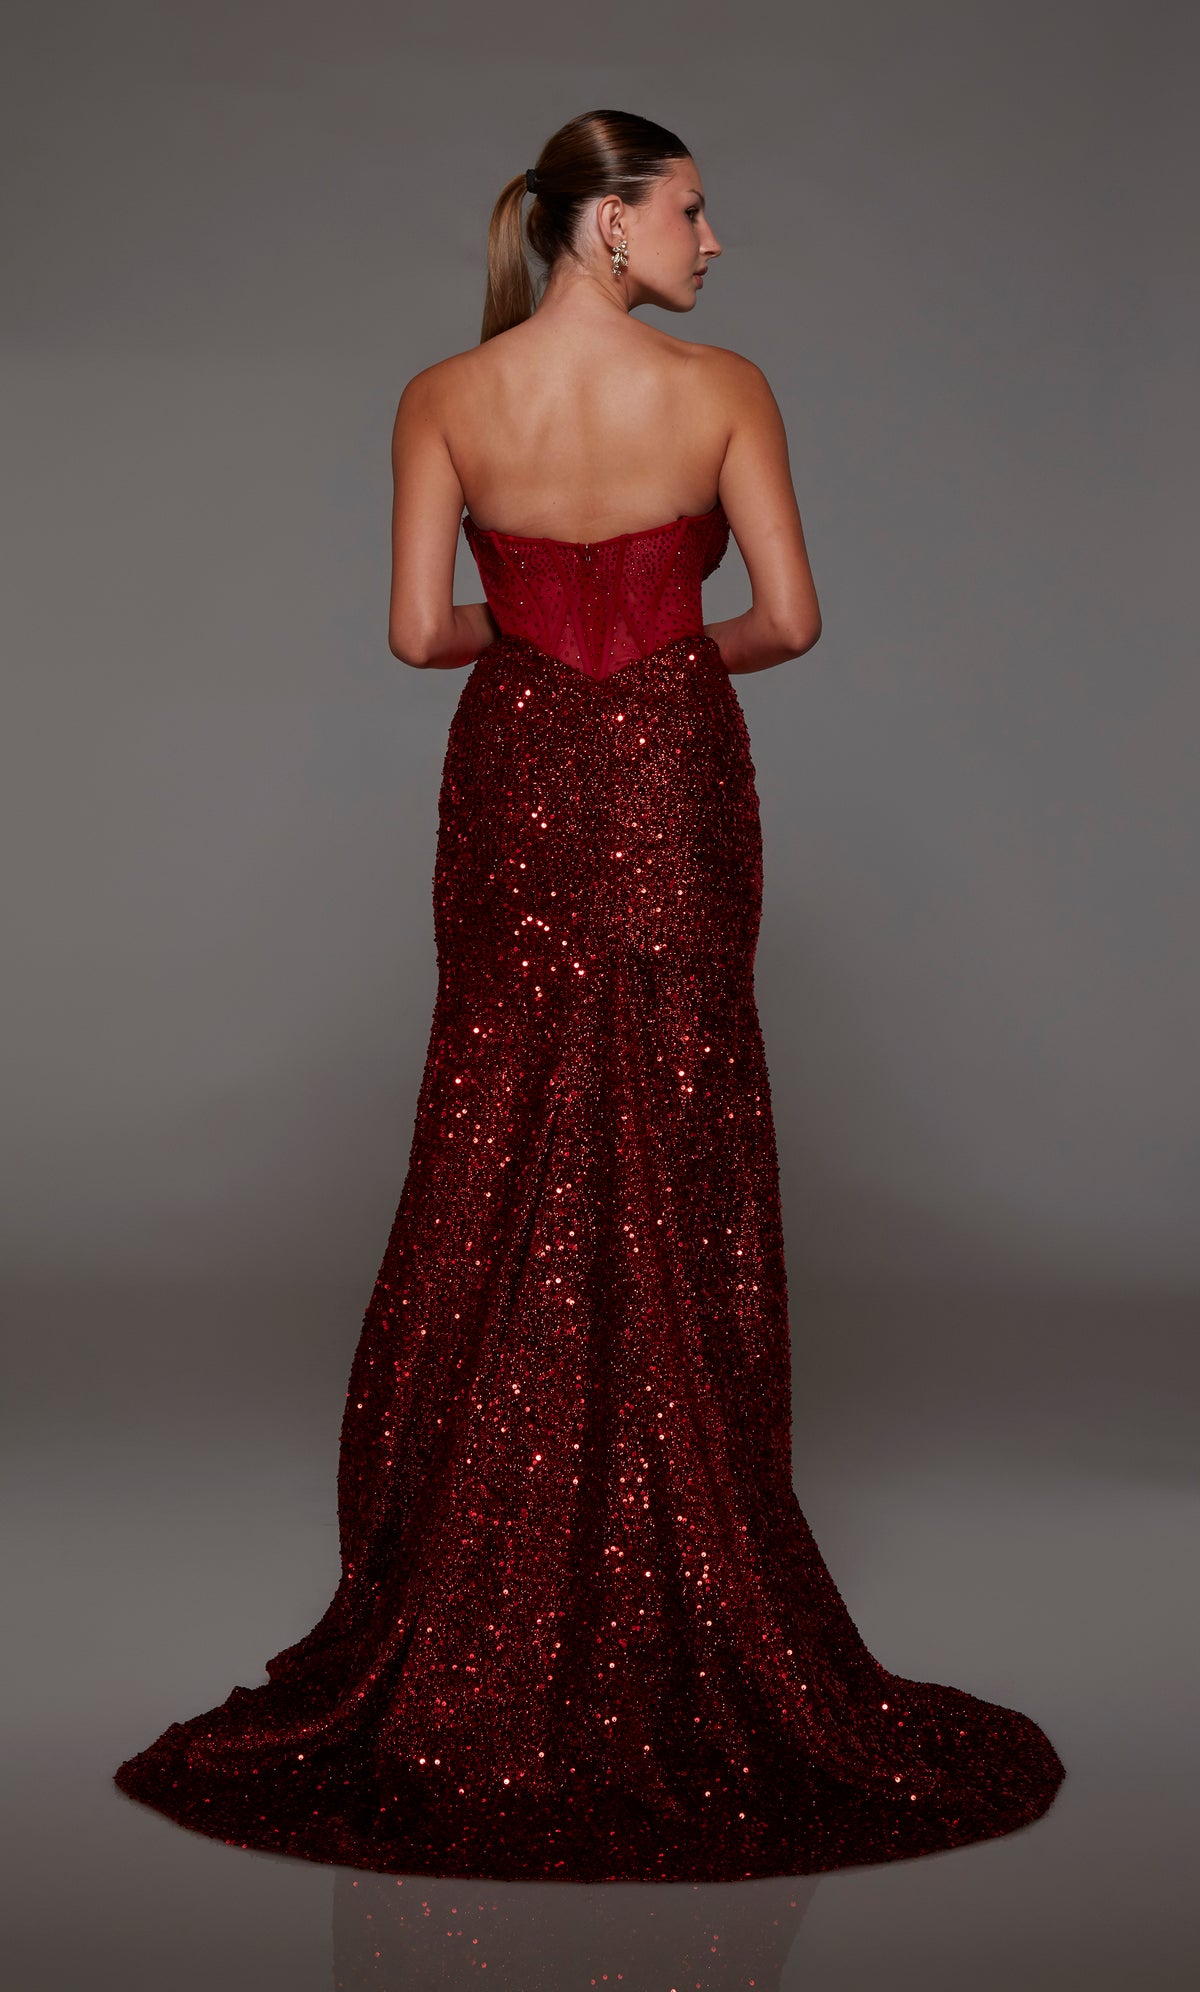 Captivating wine strapless prom dress with intricate sequin detailing, corset bodice with an zip up back, and an graceful train for an red-carpet-worthy look.